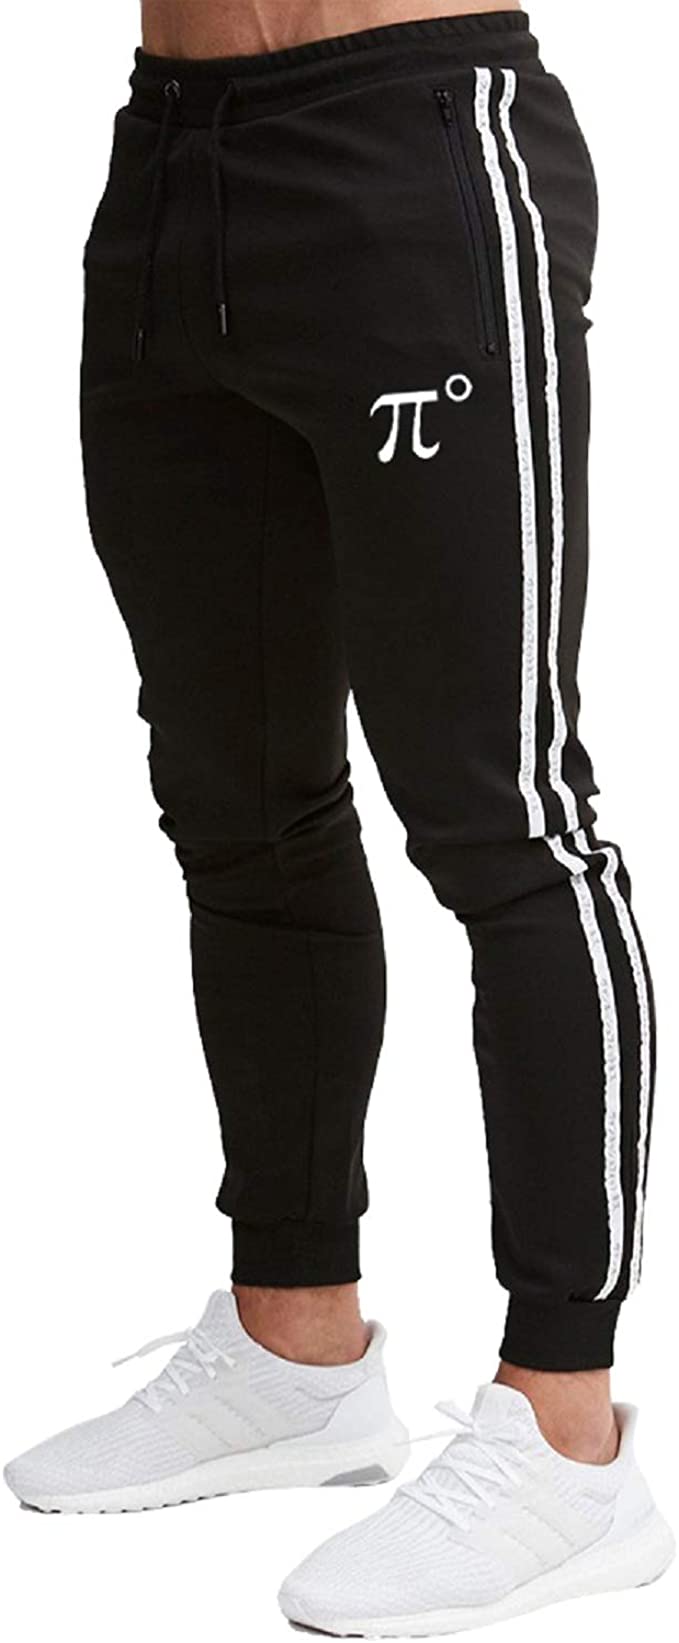 PIDOGYM Men's Slim Striped Jogger Pants,Tapered Sweatpants for Training,Running,Workout